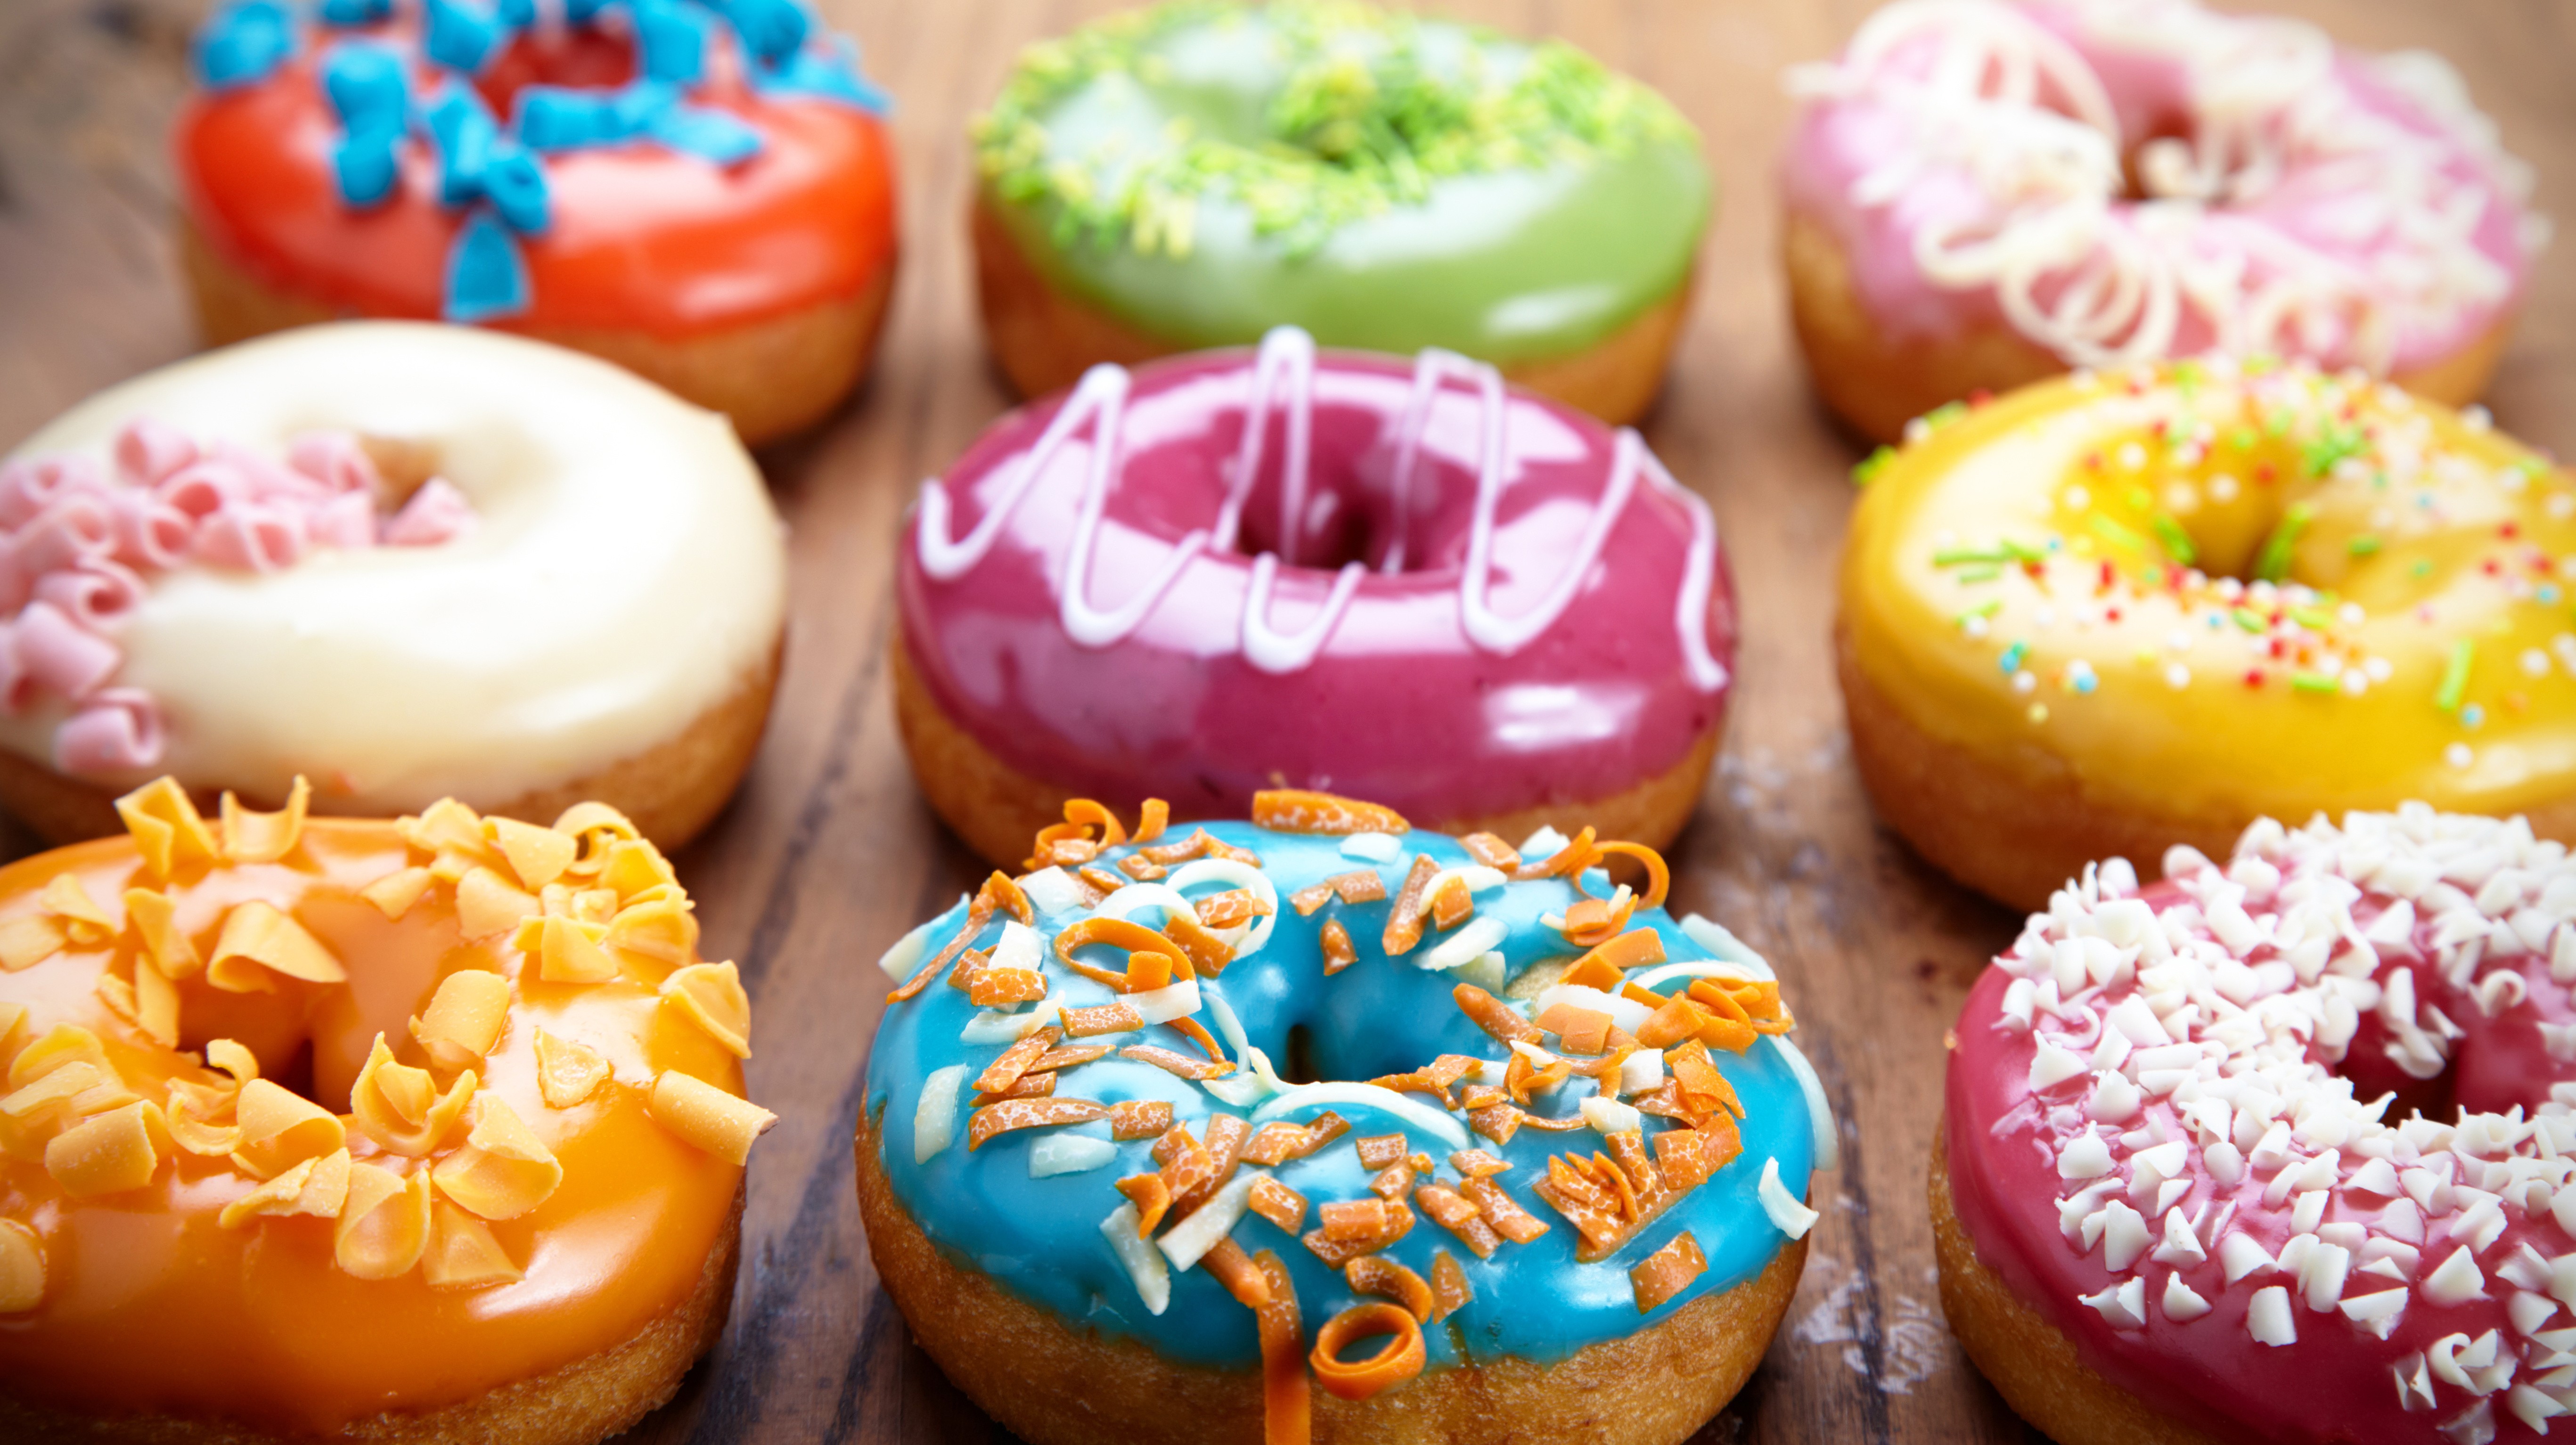 General 5467x3067 doughnuts food dessert sweets depth of field colorful cyan red vibrant donut still life